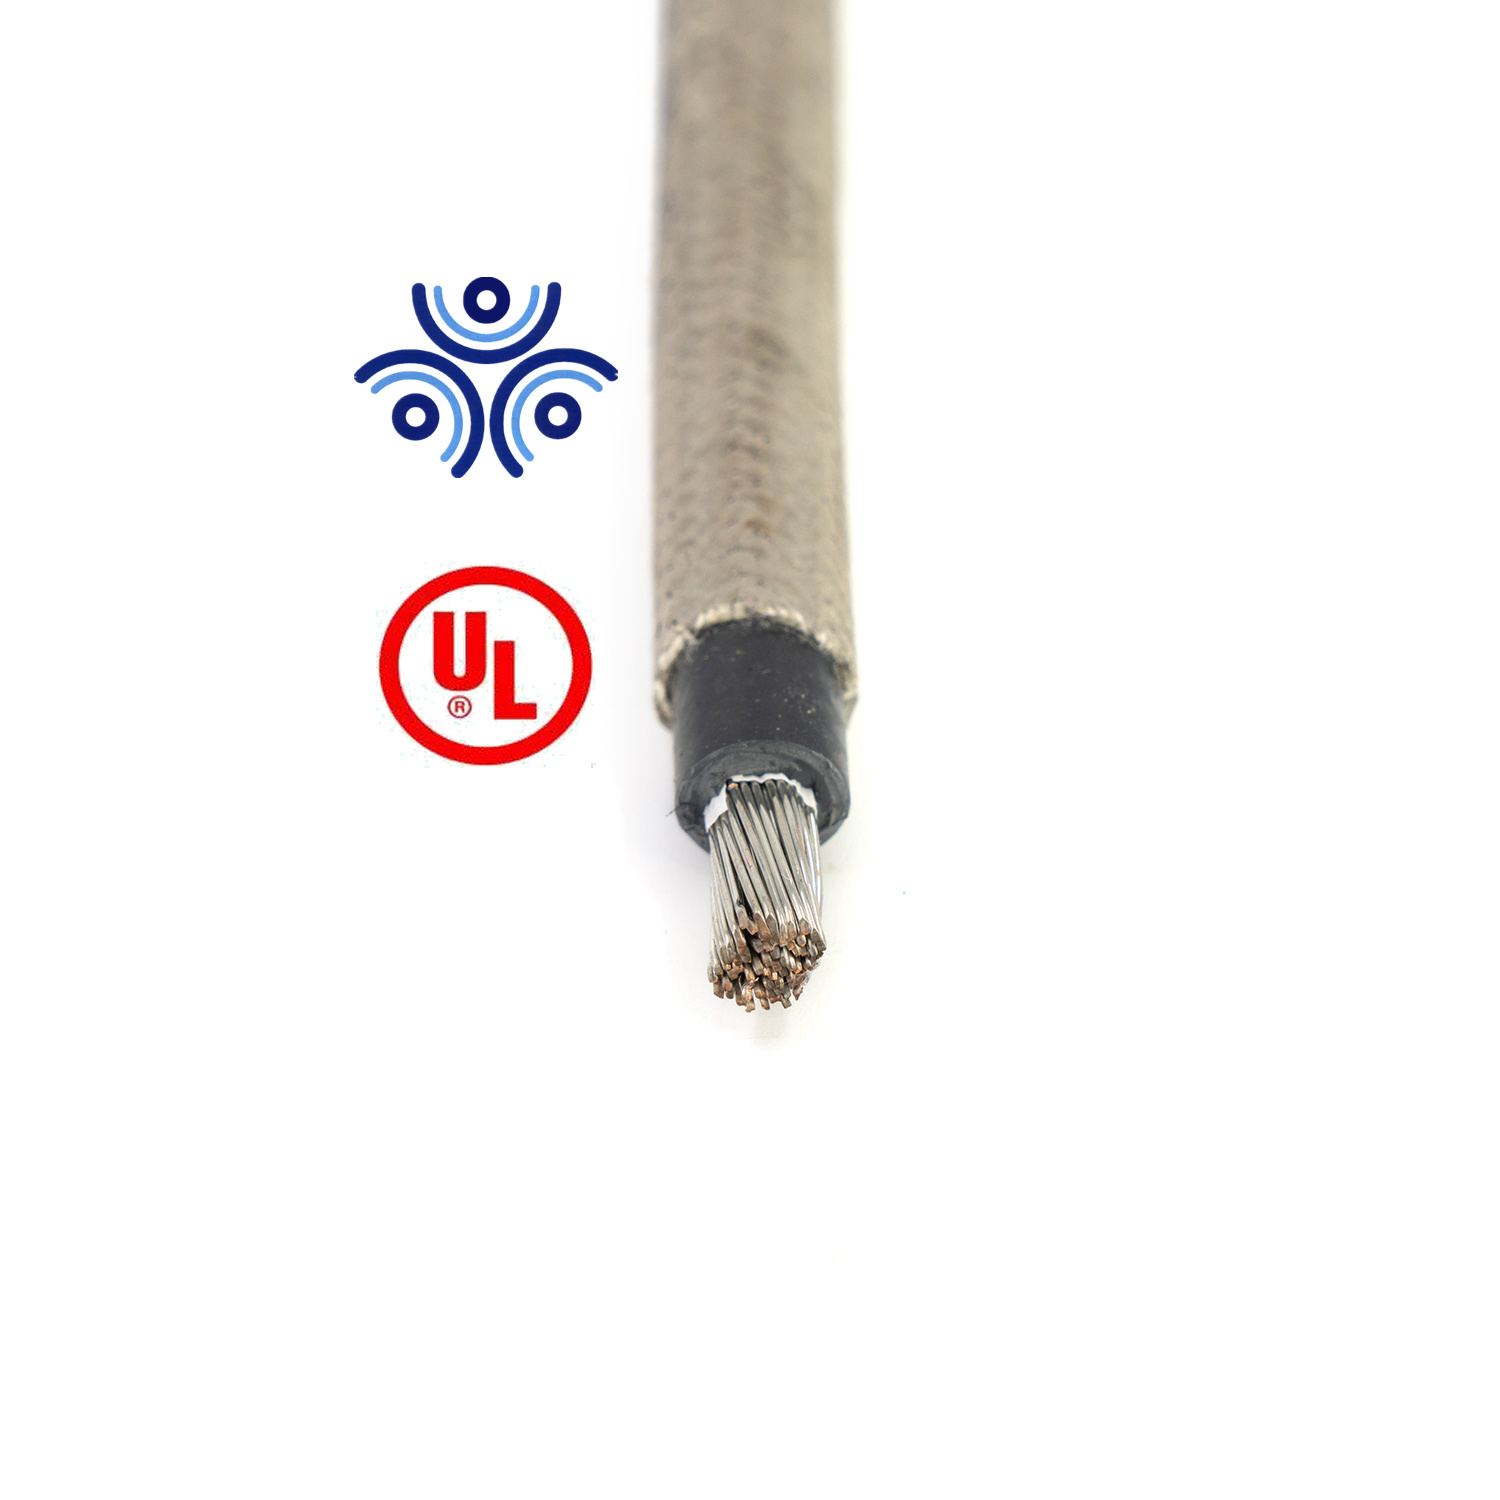 Rru Ht Cables Tinned Copper Wire Power 5g Telecom Cable